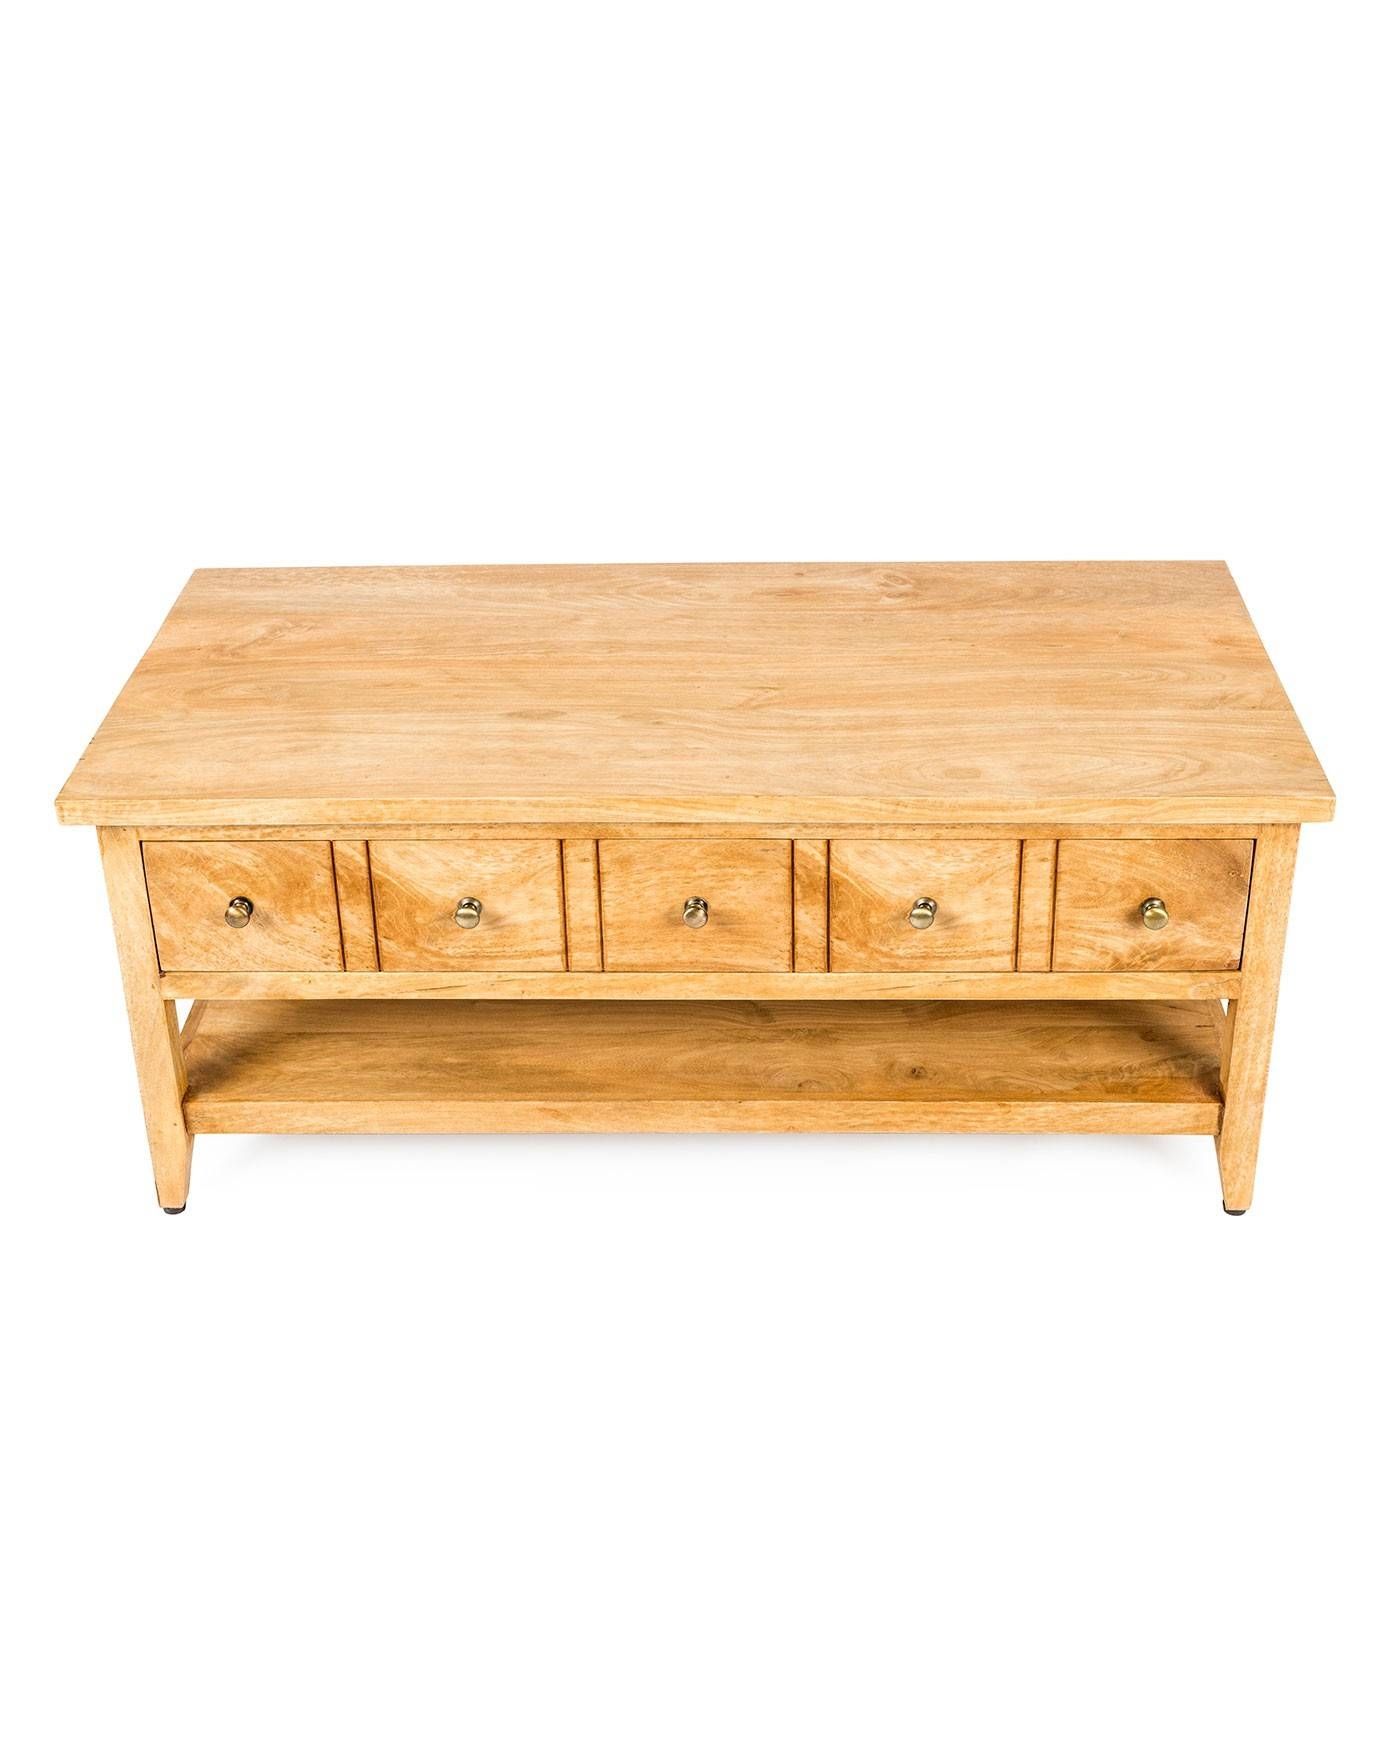 Groove Solid Mango Wood Coffee Table With Drawers – Oak Shade Inside Mango Wood Coffee Tables (View 12 of 30)